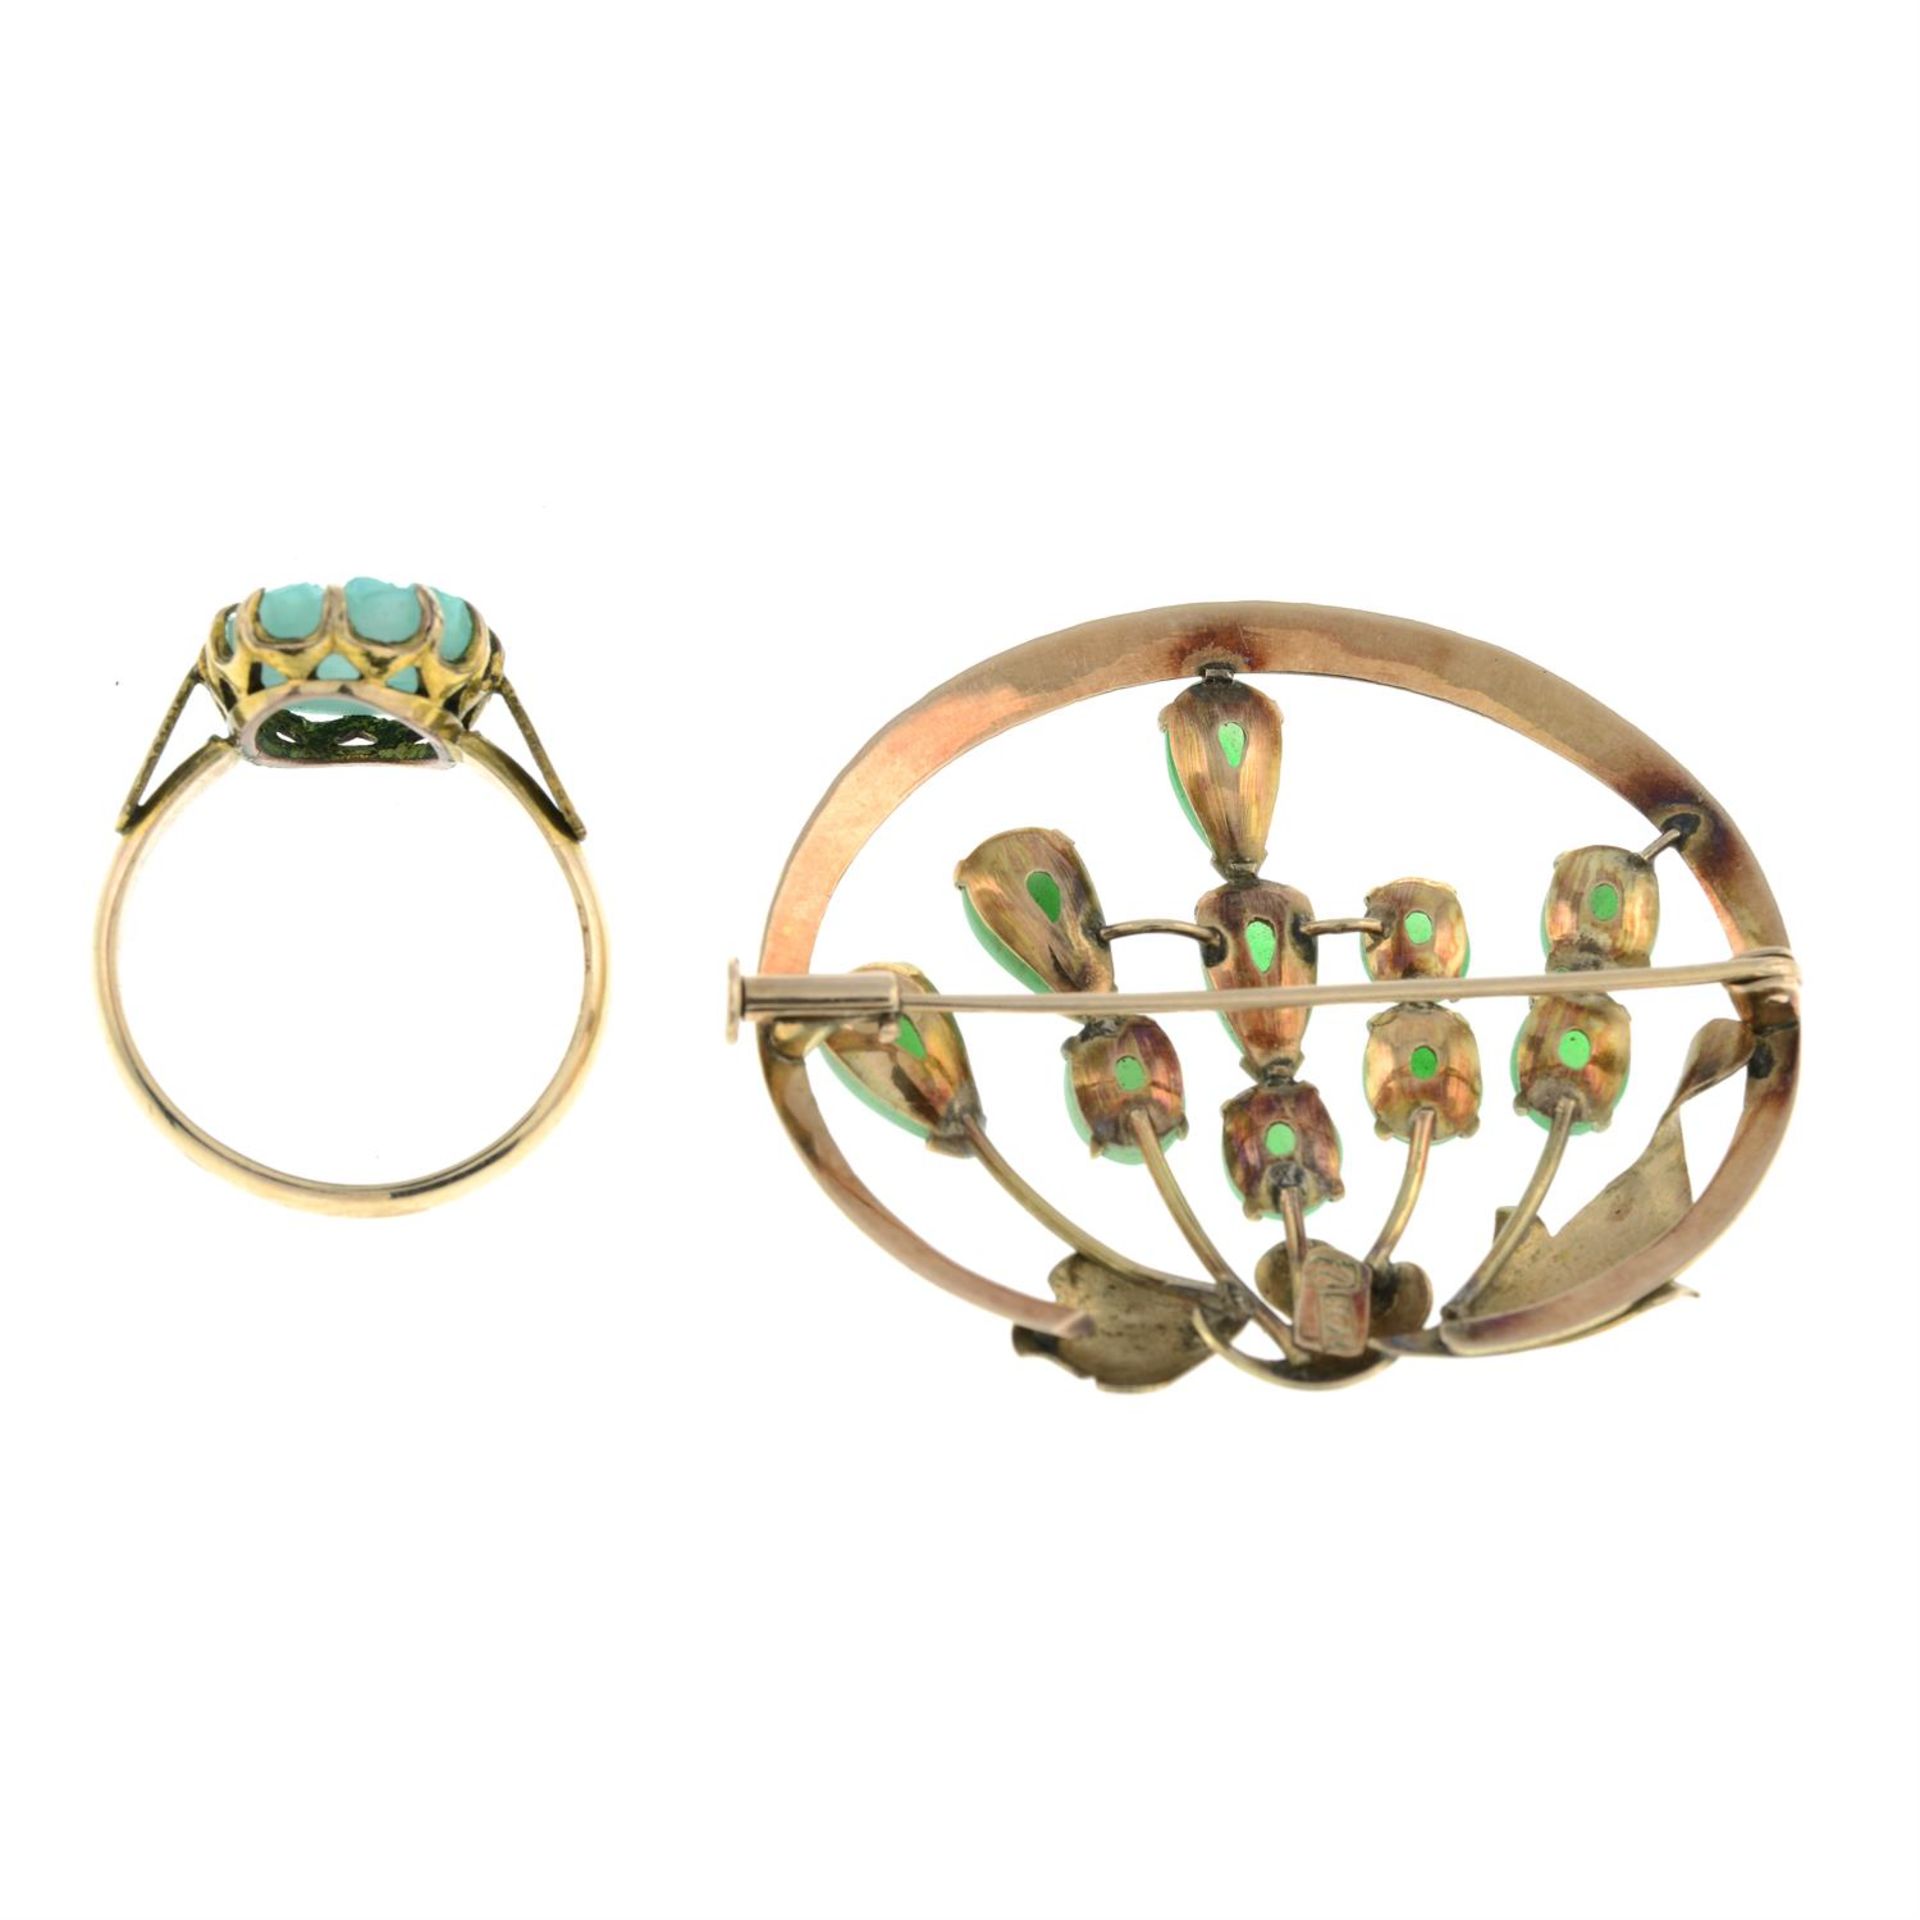 A jade floral brooch and a carved glass ring. - Image 2 of 2